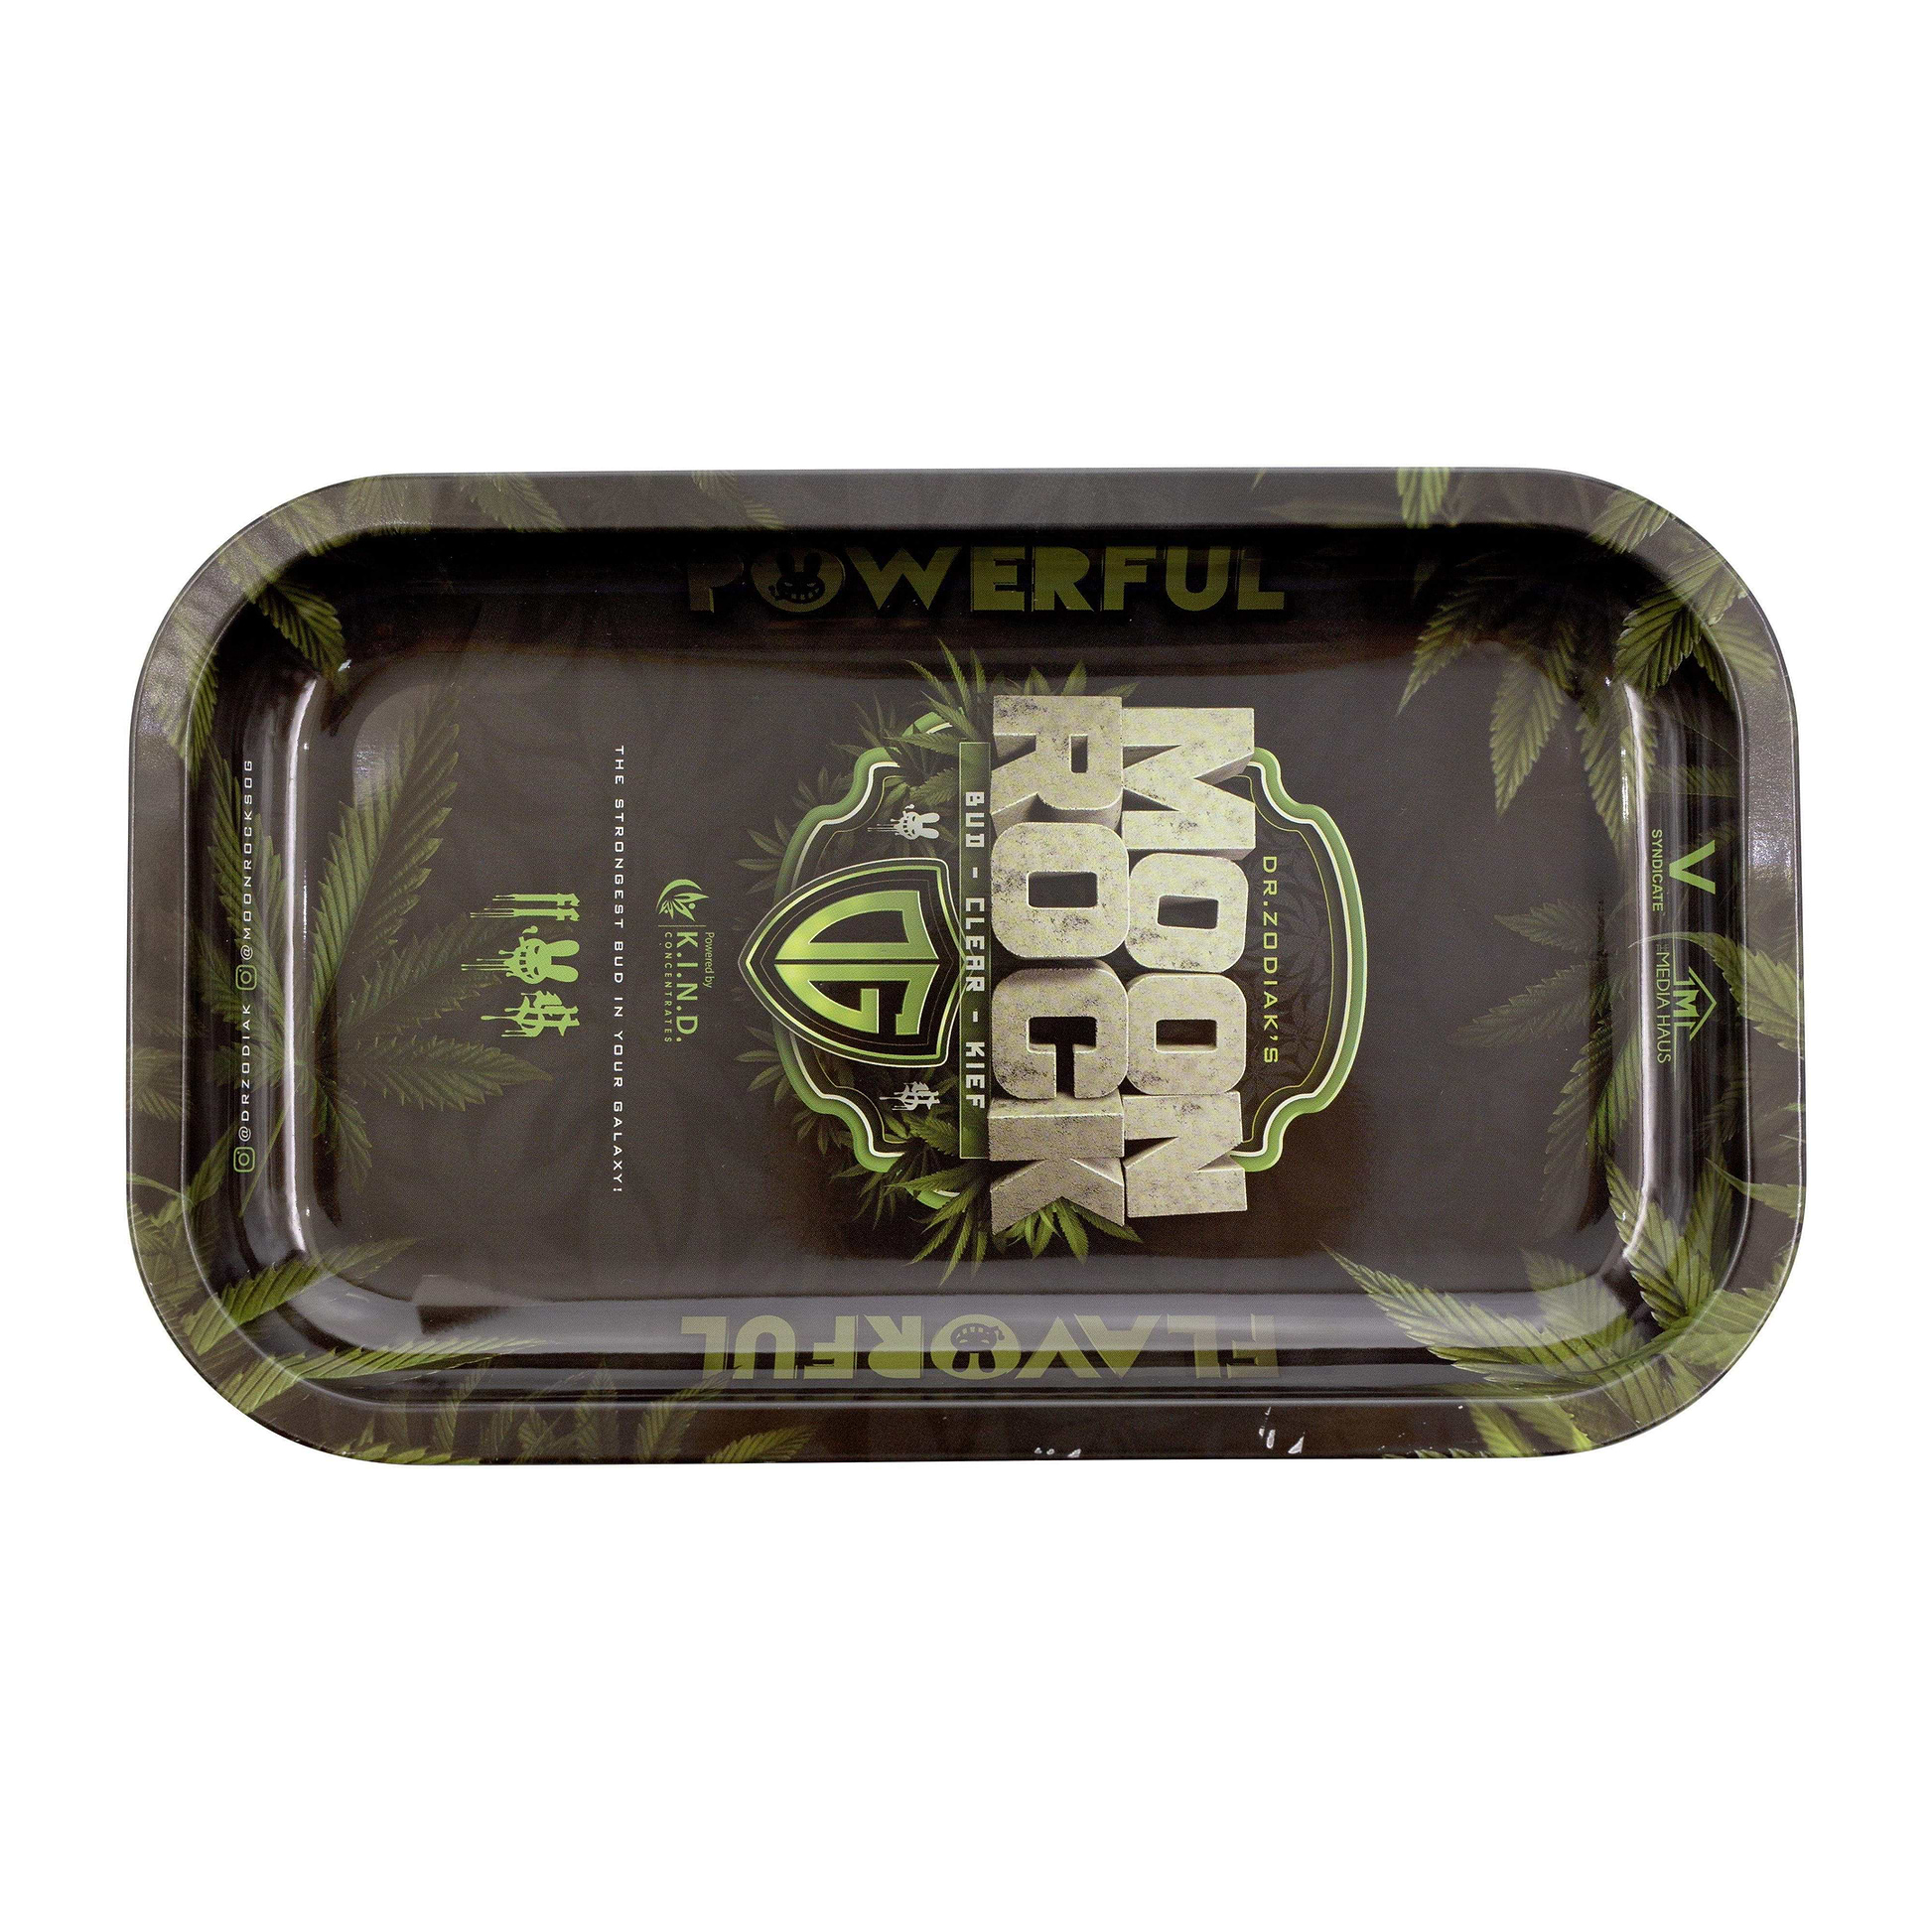 Dr. Zodiak-themed Moon Rock rolling trays with weed leaves and rolling paper cool designs